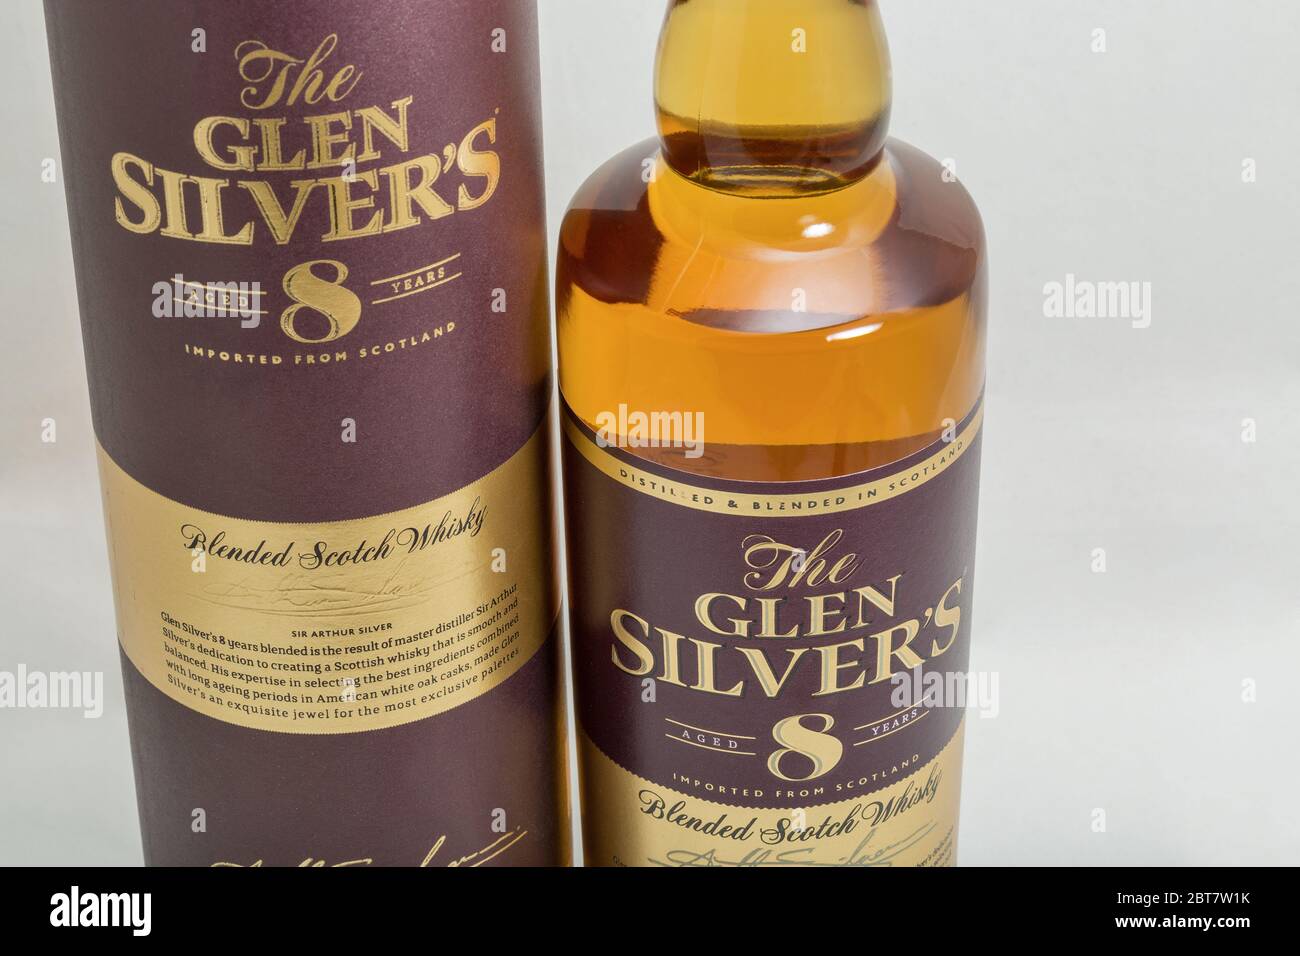 KYIV, UKRAINE - APRIL 16, 2020: The Glen Silver's aged 8 years blended scotch whisky bottle and box closeup against background Stock Photo - Alamy